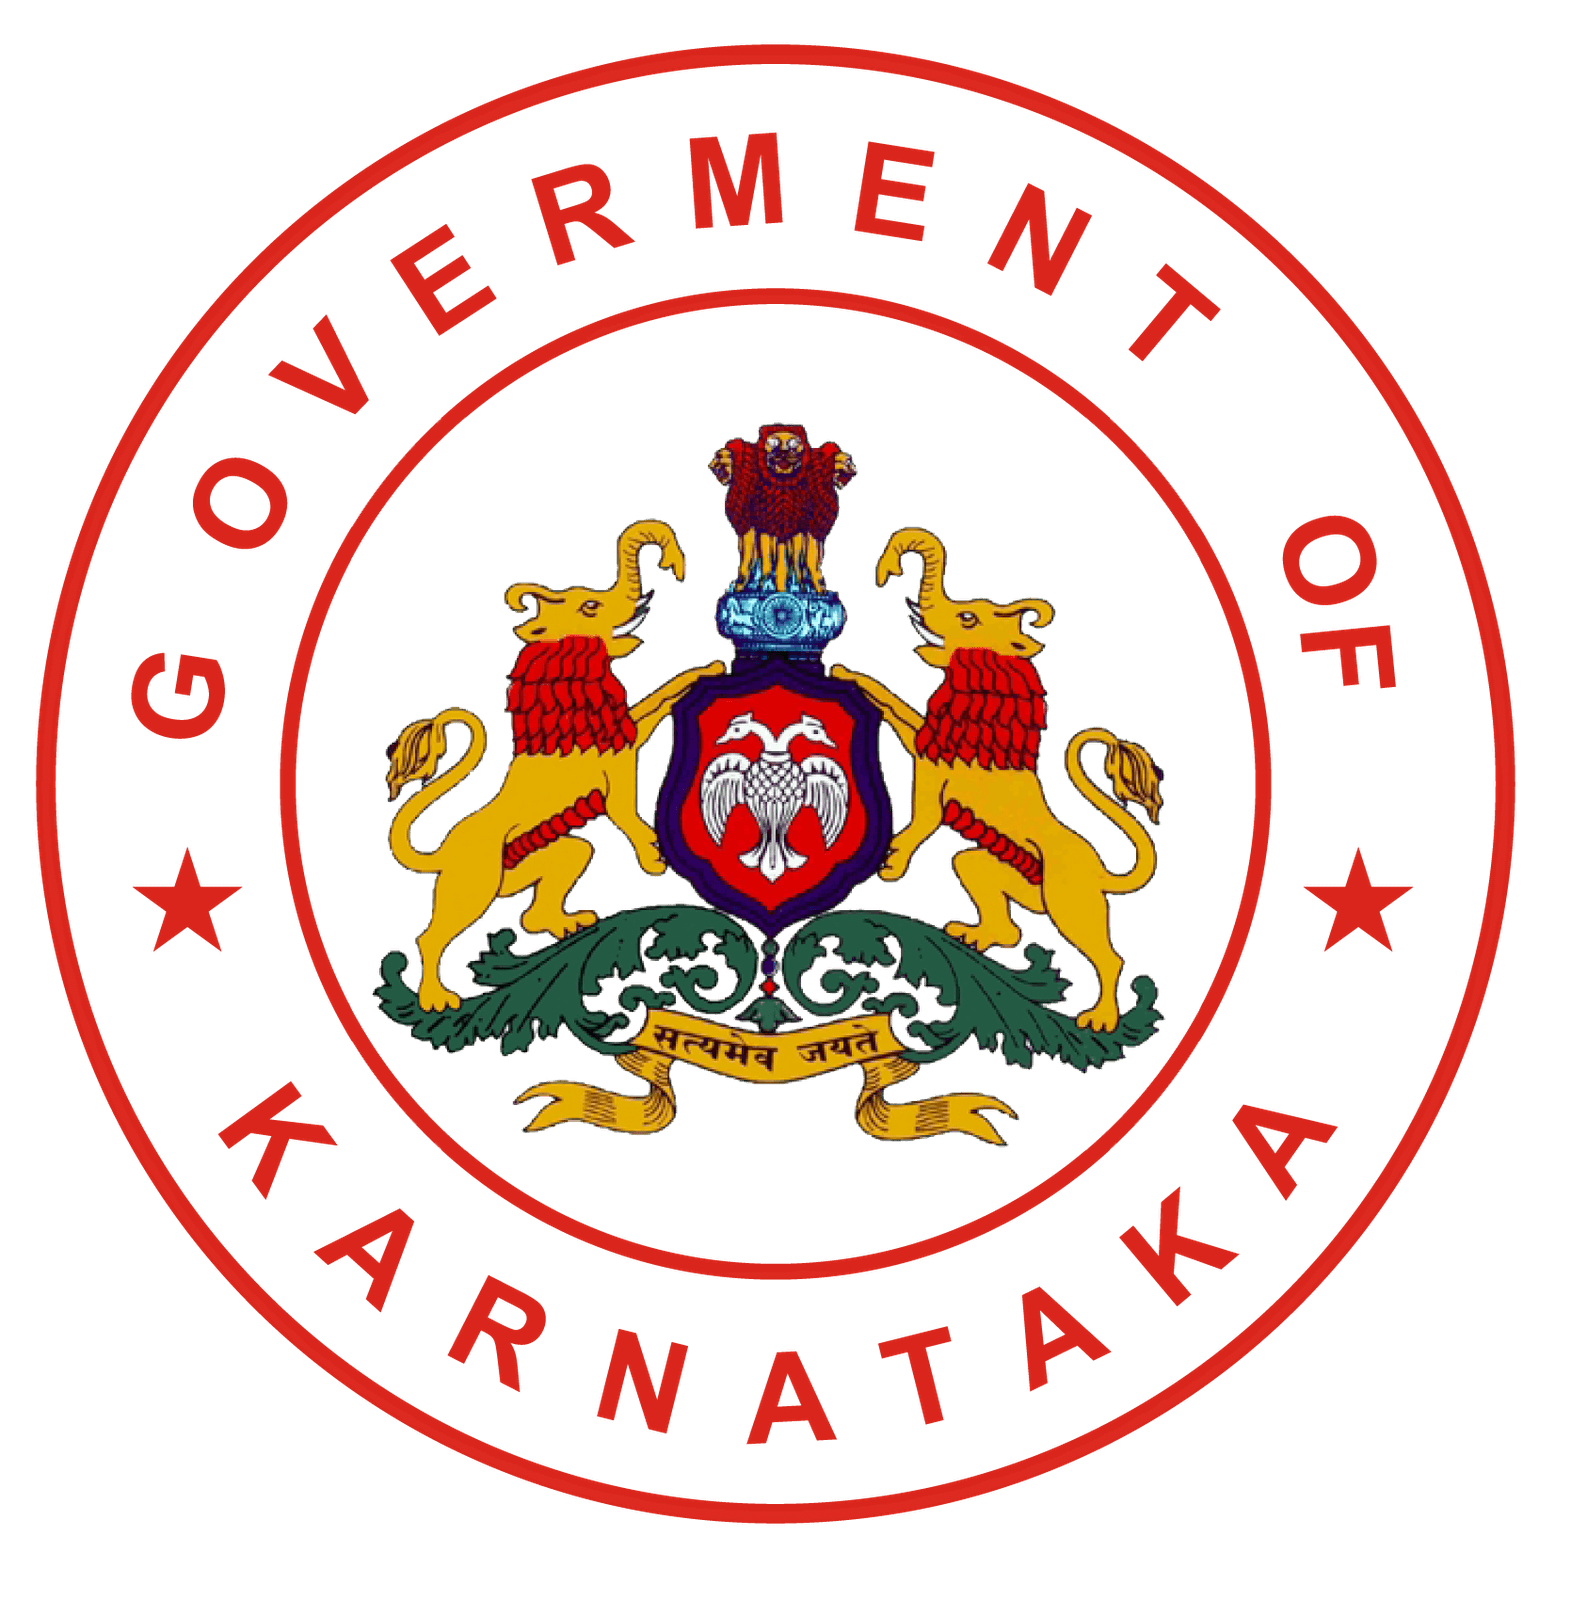 Karnataka Government notifies rules governing Creche facility under the Maternity Benefit Act